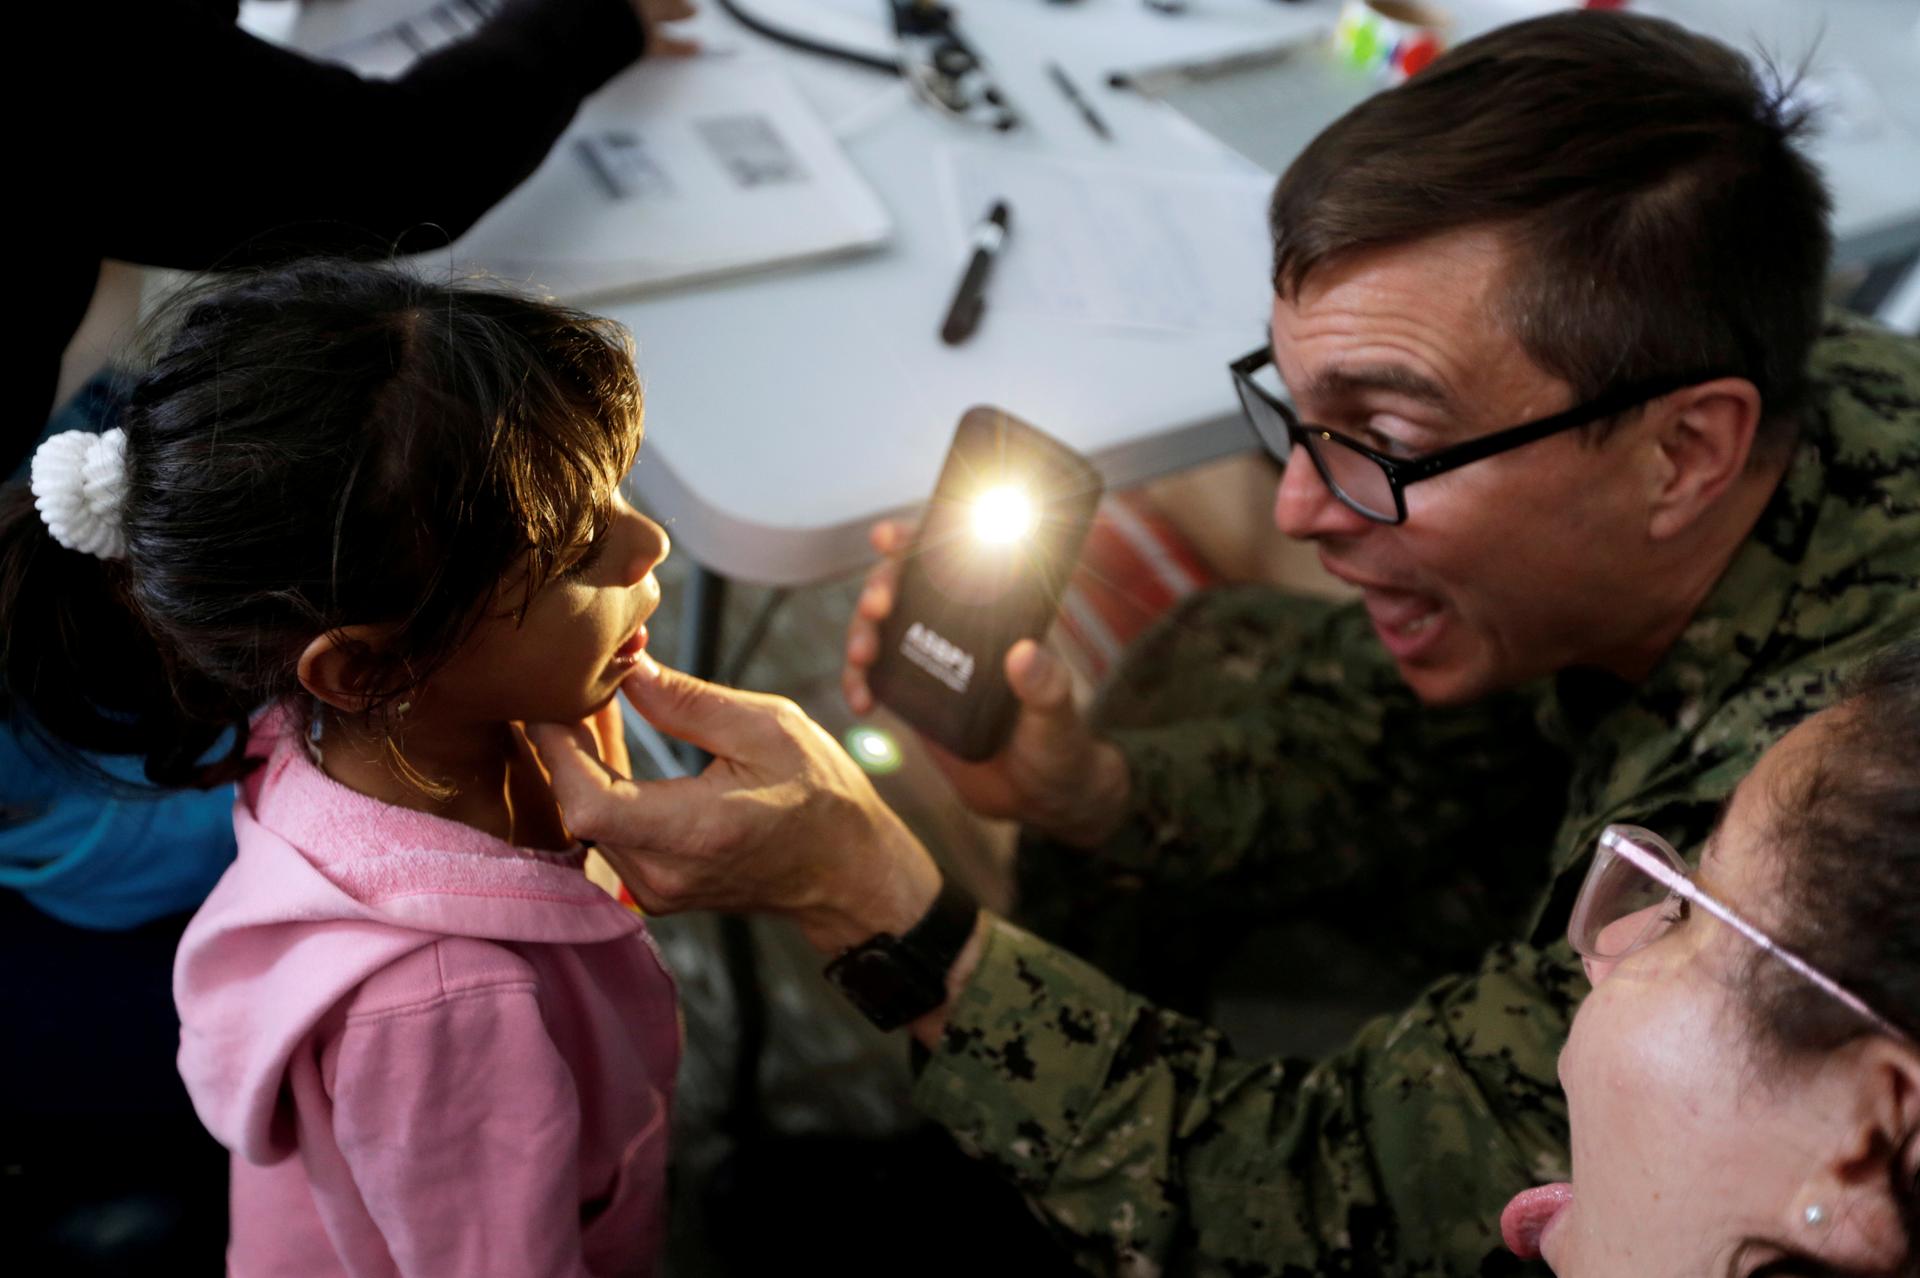 a doctor shining a light into a young girl's mouth